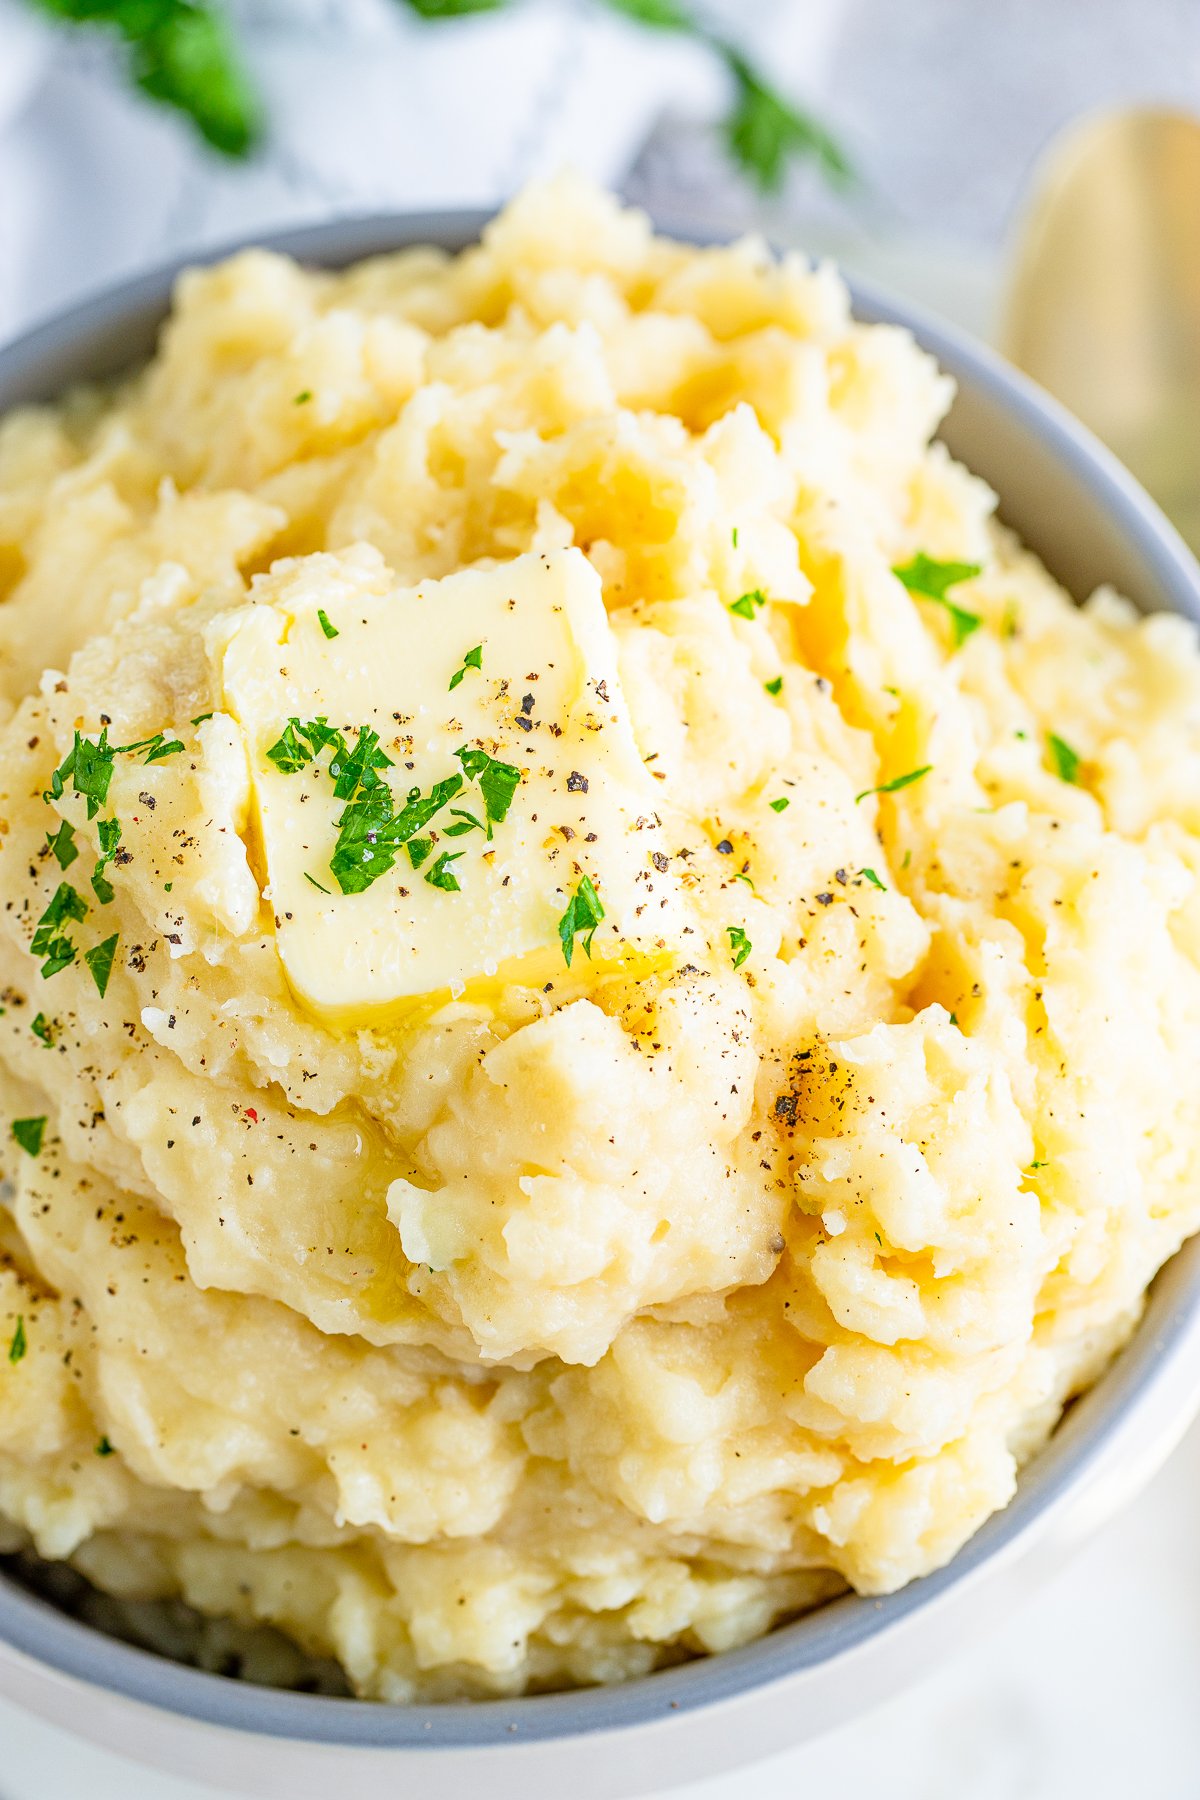 Overhead photo of butter and parsley garnished Slow Cooker Mashed Potatoes.